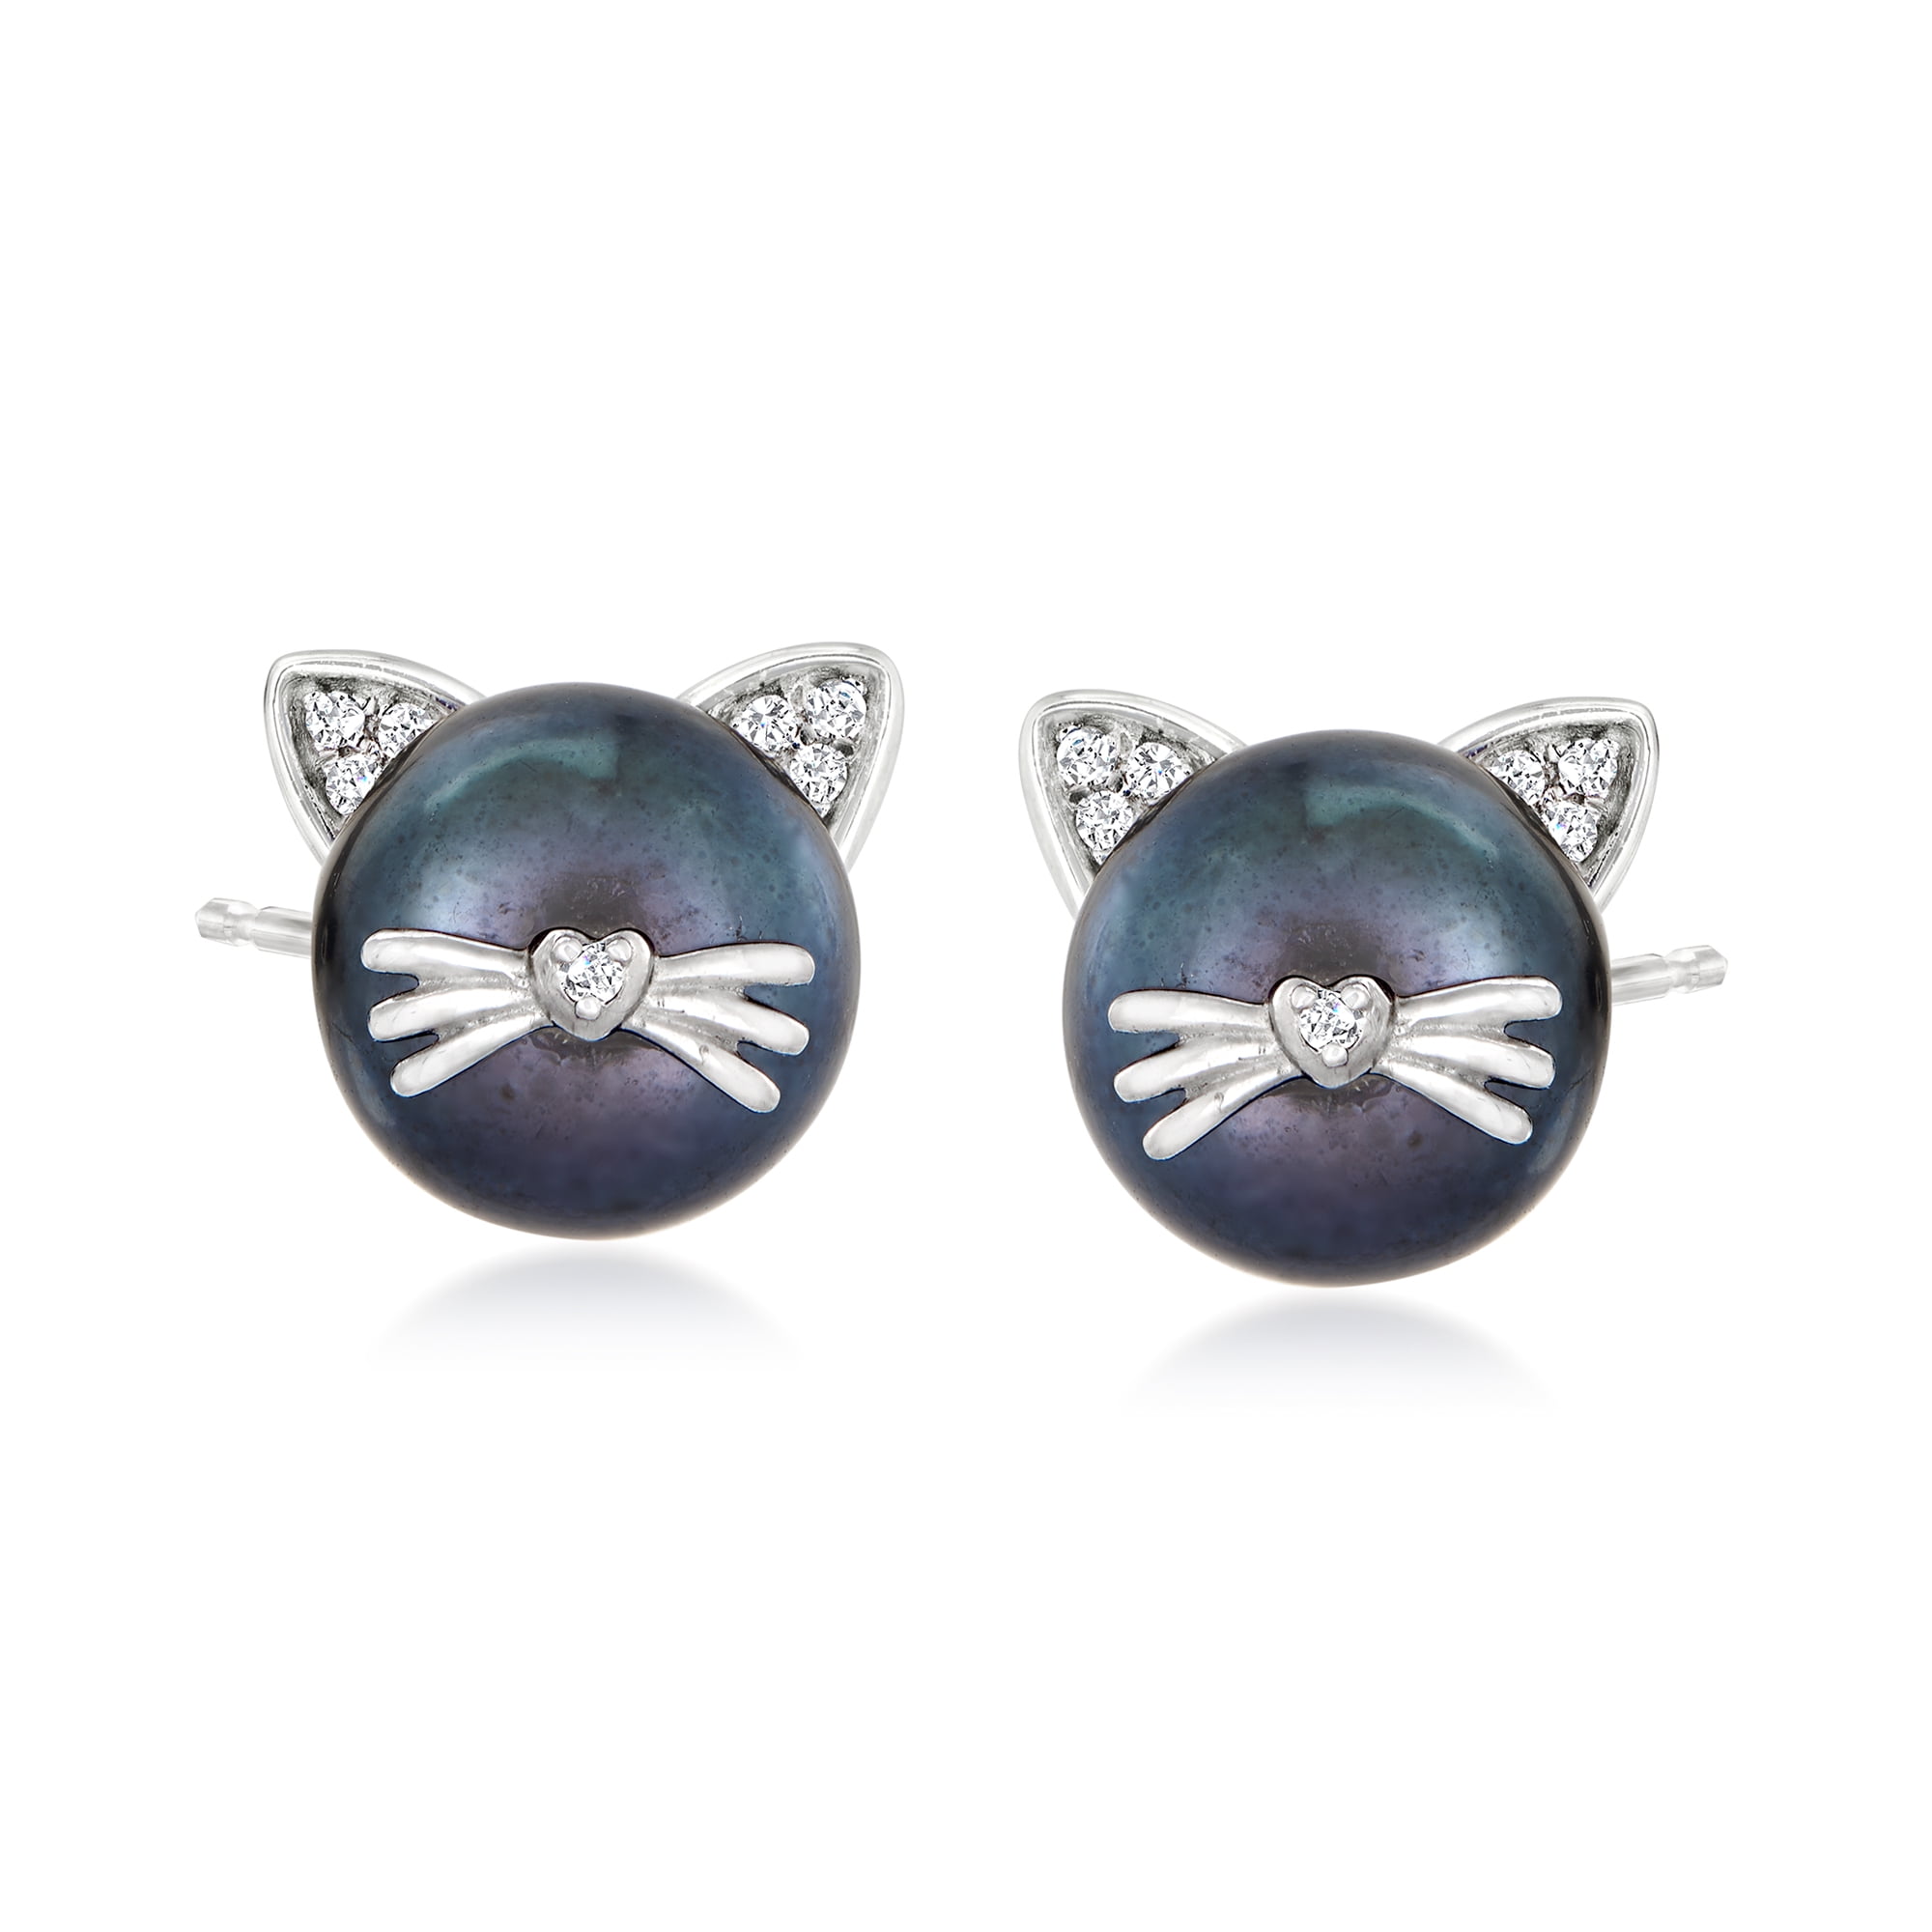 Ross-Simons 8-8.5mm Black Cultured Pearl Cat Earrings With Diamond